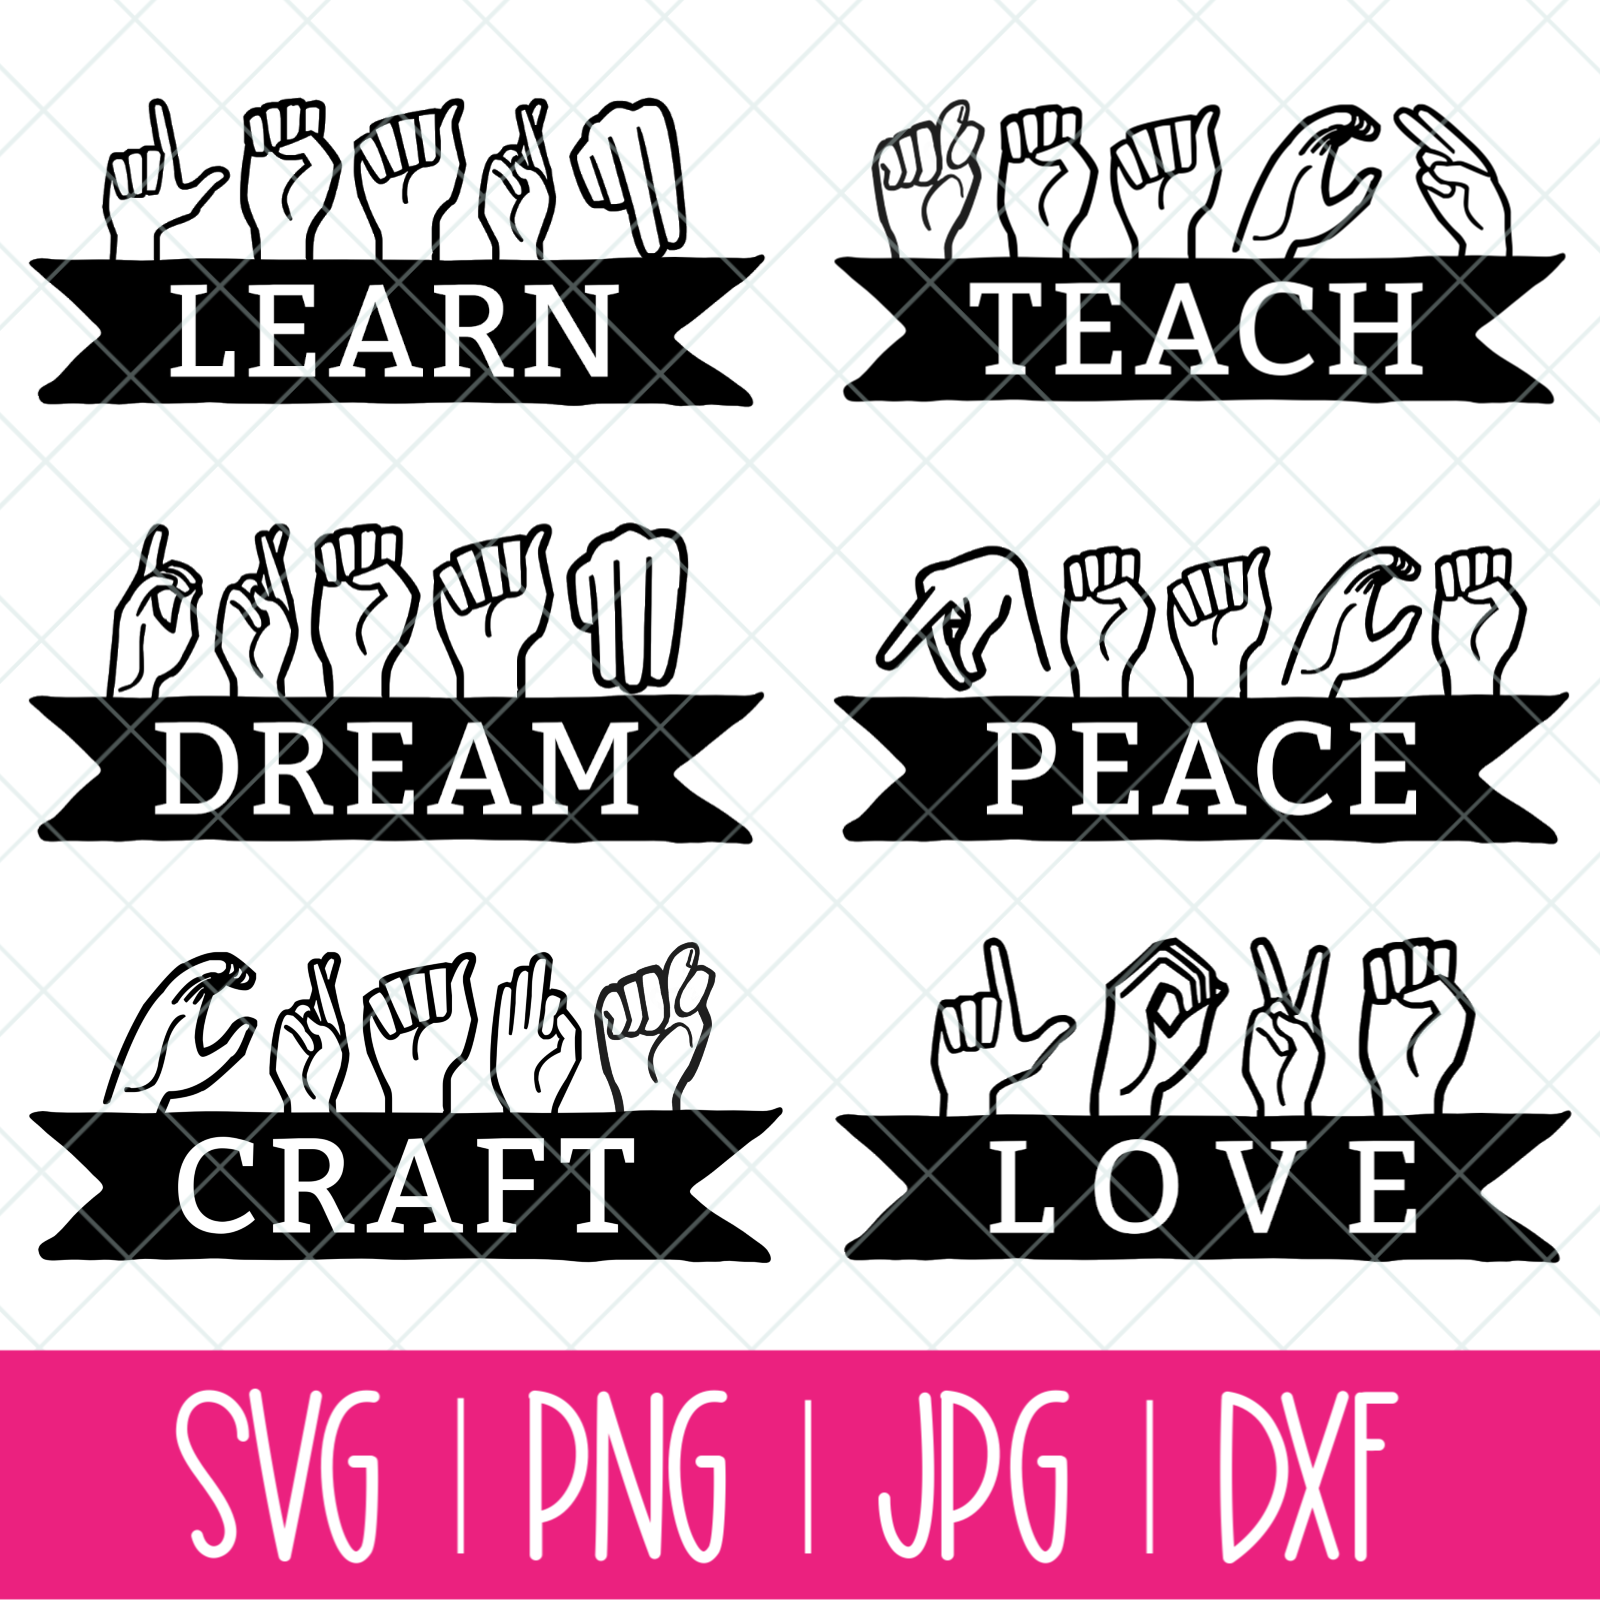 Download 6 Inspiring Asl Words Svg Includes Love Dream Teach Learn Craft And Peace